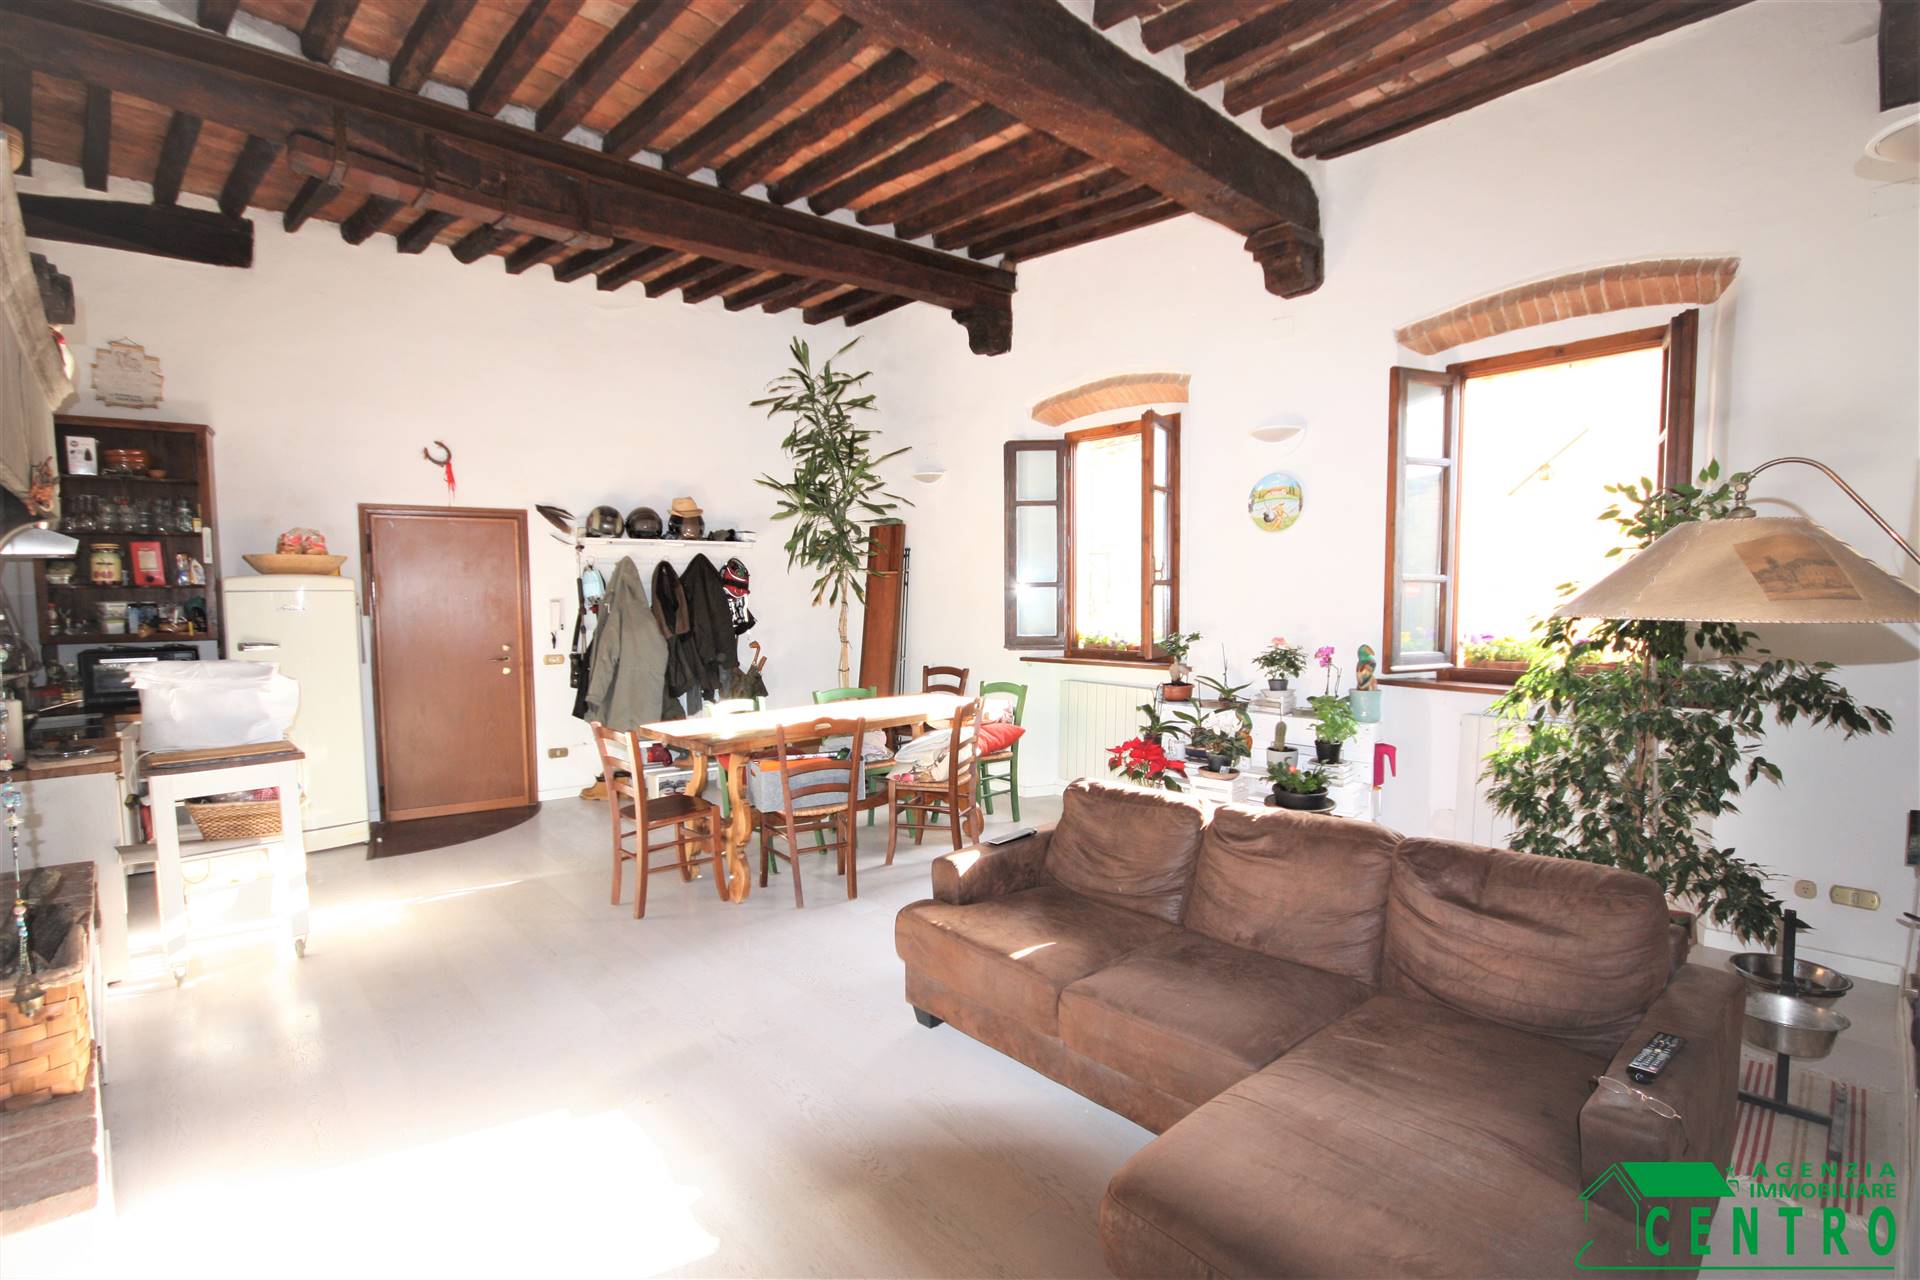 VICO D'ELSA, BARBERINO TAVARNELLE, Apartment for sale, Habitable, Heating Individual heating system, Energetic class: G, Epi: 93,96 kwh/m2 year, 